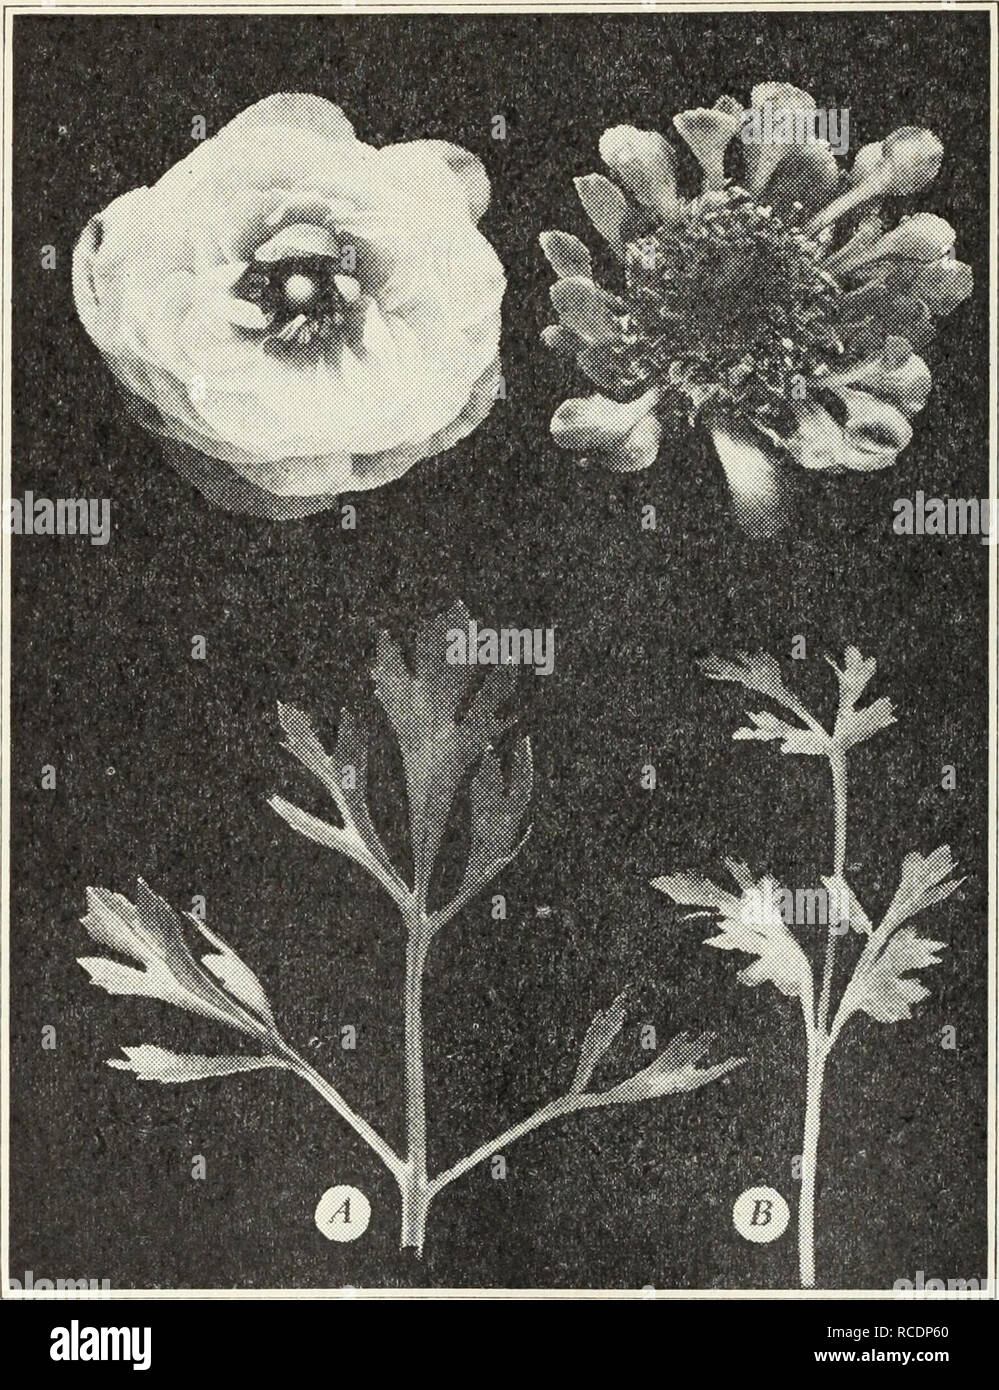 . Diseases of flowers and other ornamentals. Flowers; Plant diseases. Diseases of Flowers and Other Ornamentals 61 bodies. The fungus is probably a species of Sclerotium, Botrytis, or Sclerotinia but, since no spores have been observed, has not been defi- nitely determined. Affected plants should be destroyed. Yellows.—Affected flowers are of a greenish-yellow color and de- formed as shown in figure 25. The leaves are yellow and somewhat. Fig. 25.—A, Normal ranunculus flower and leaf; B, Effect of ranunculus yellows. stunted and misshapen. The appearance of the diseased plants strongly suggest Stock Photo